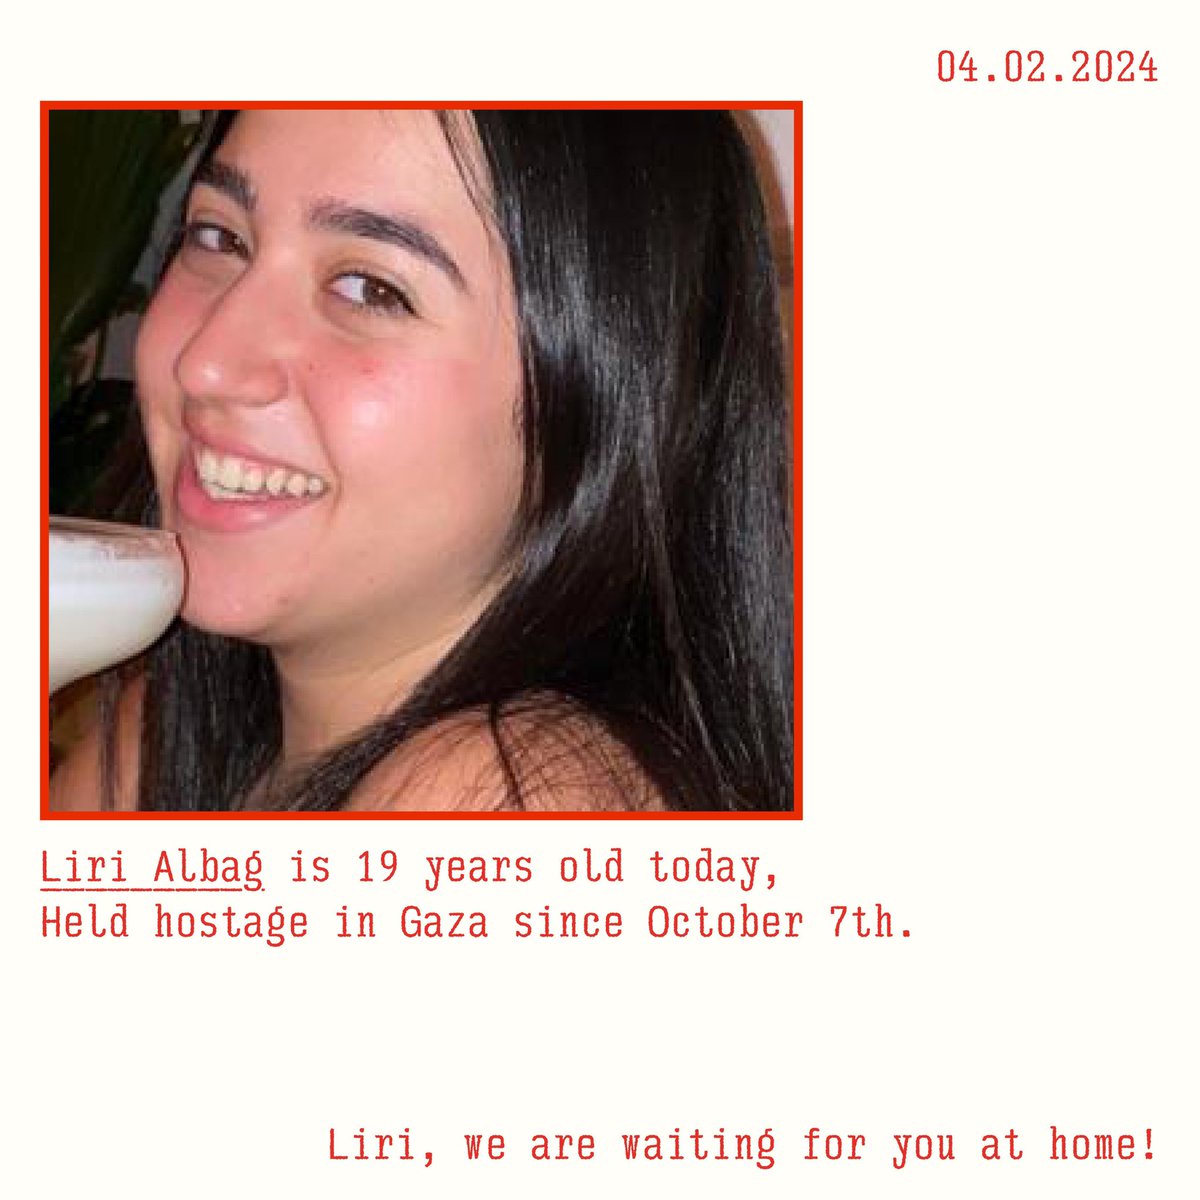 Happy Birthday Liri, Our only wish is that you will reunite with your family soon ❤️‍🩹 #bringthemhomenow